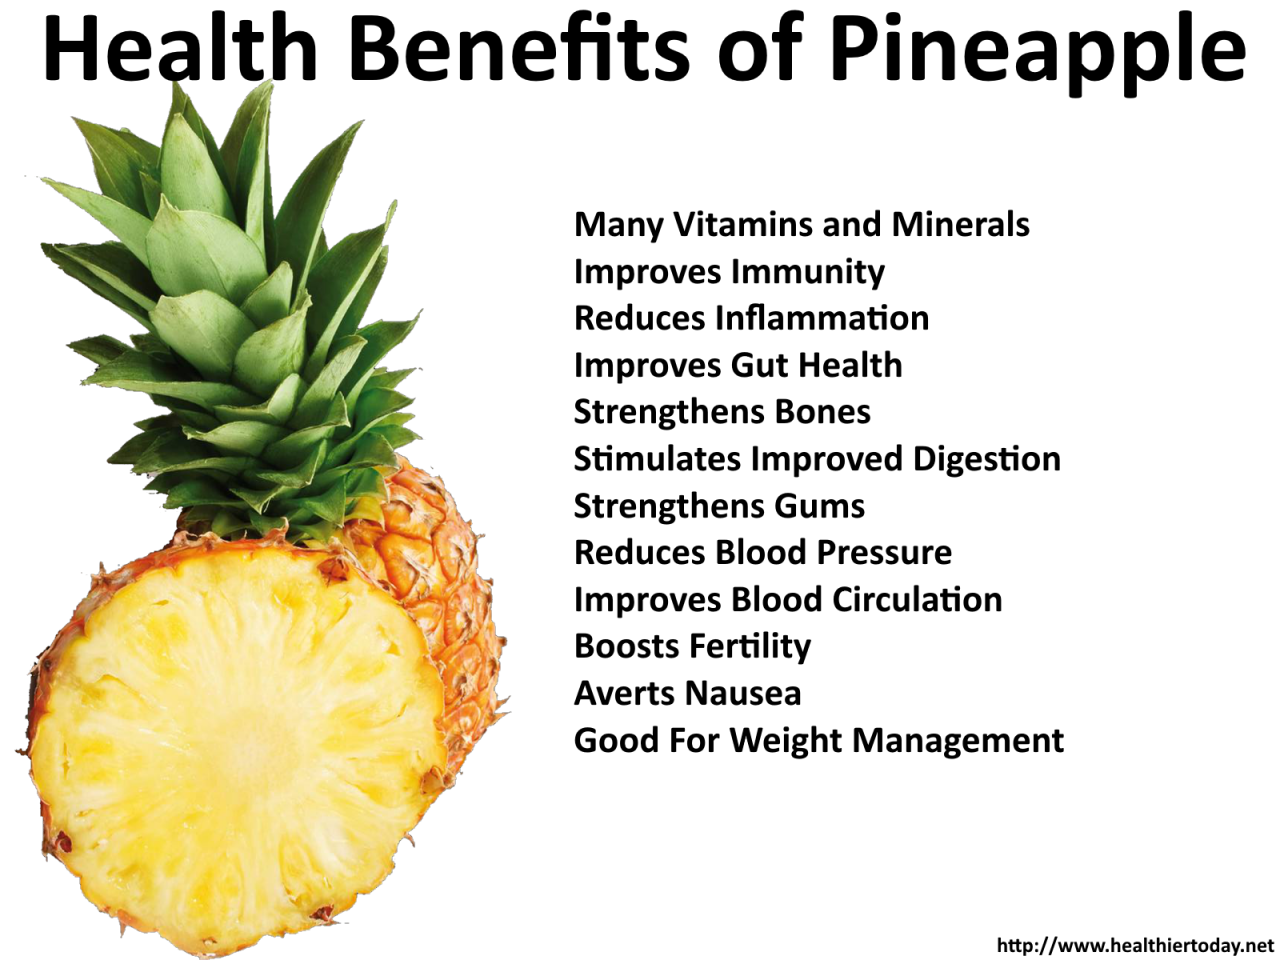 Pineapple eating weight lose food loss diet cottage health smell choose board pineapples good private make benefits visihow taste eat